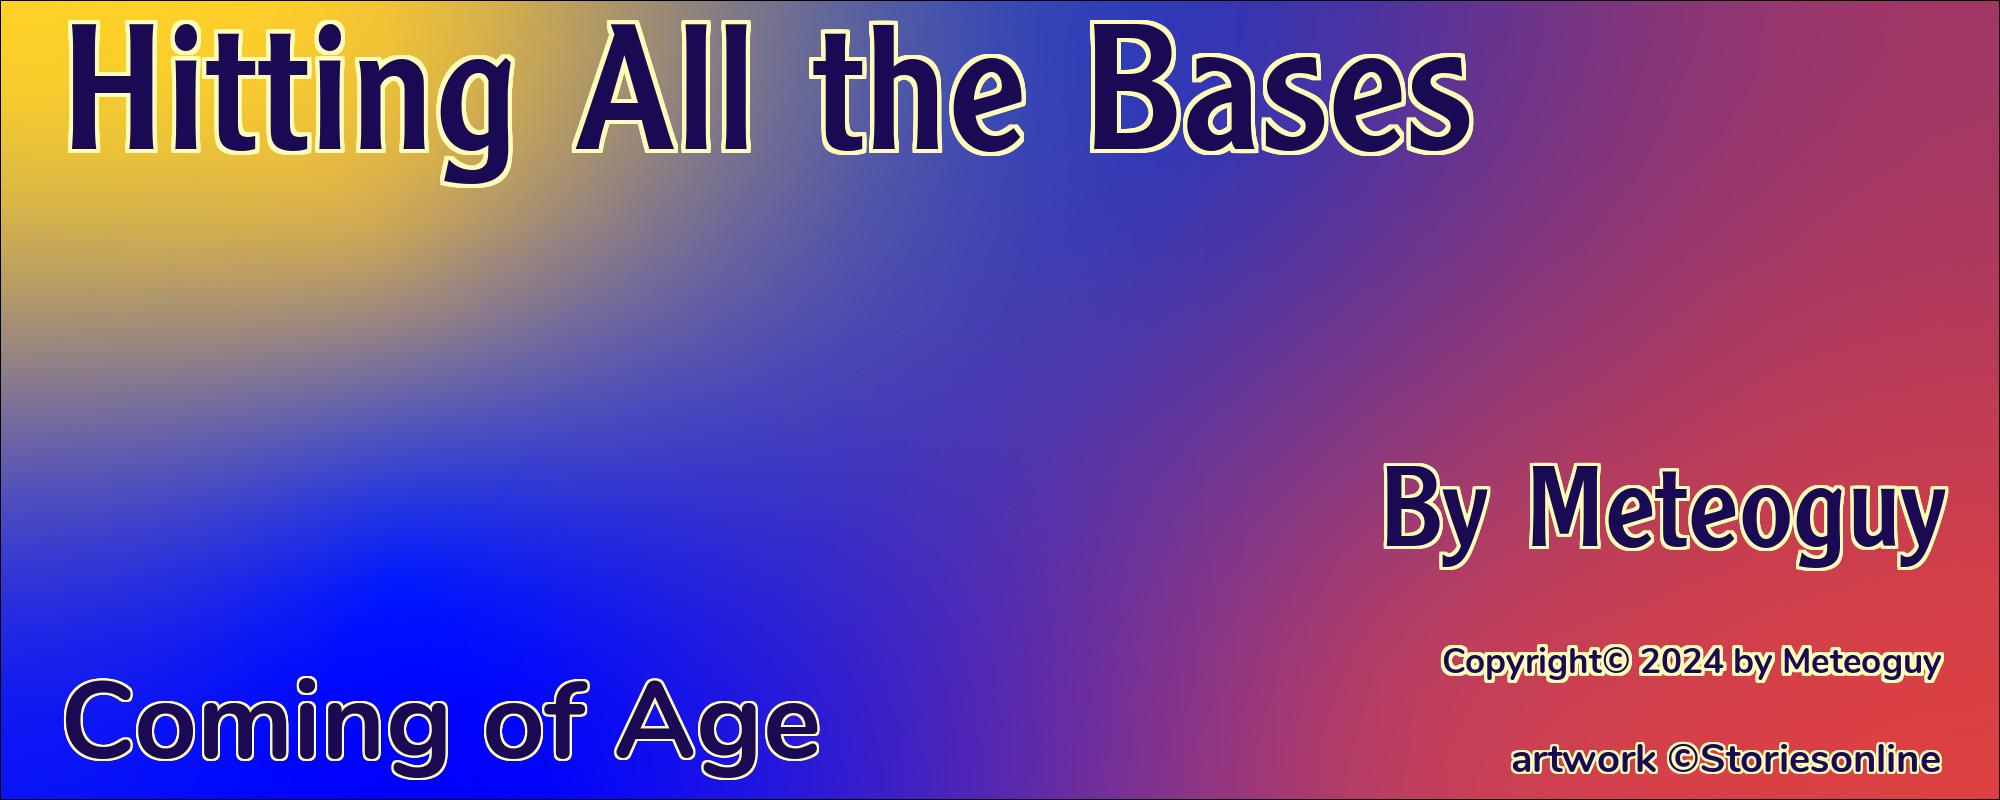 Hitting All the Bases - Cover